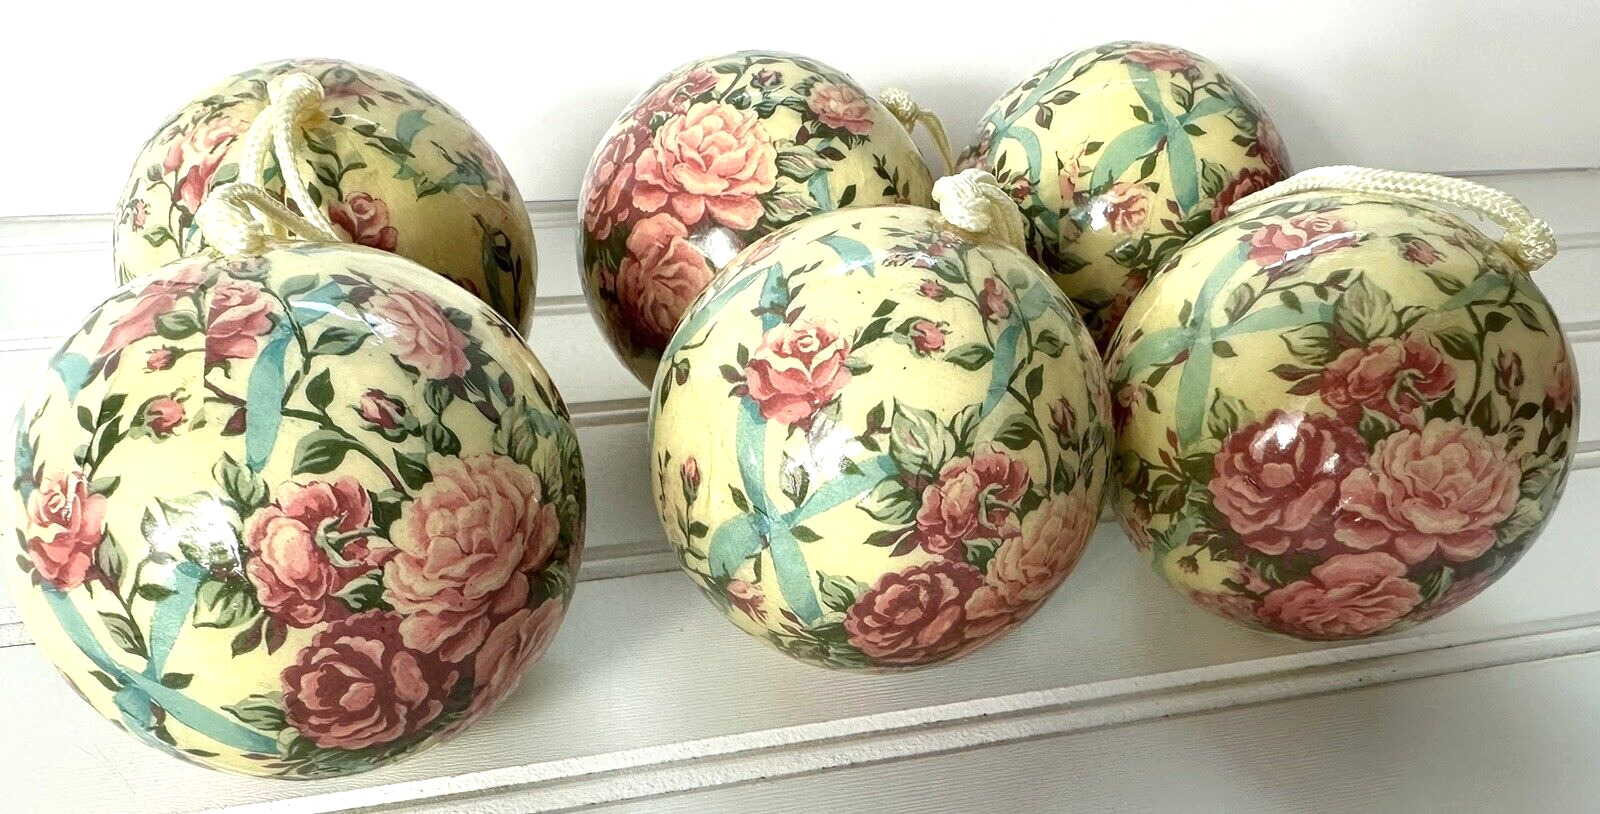 Vtg Lot of 6 Victorian Floral Roses Christmas Ball Ornament Taiwan 2.5”